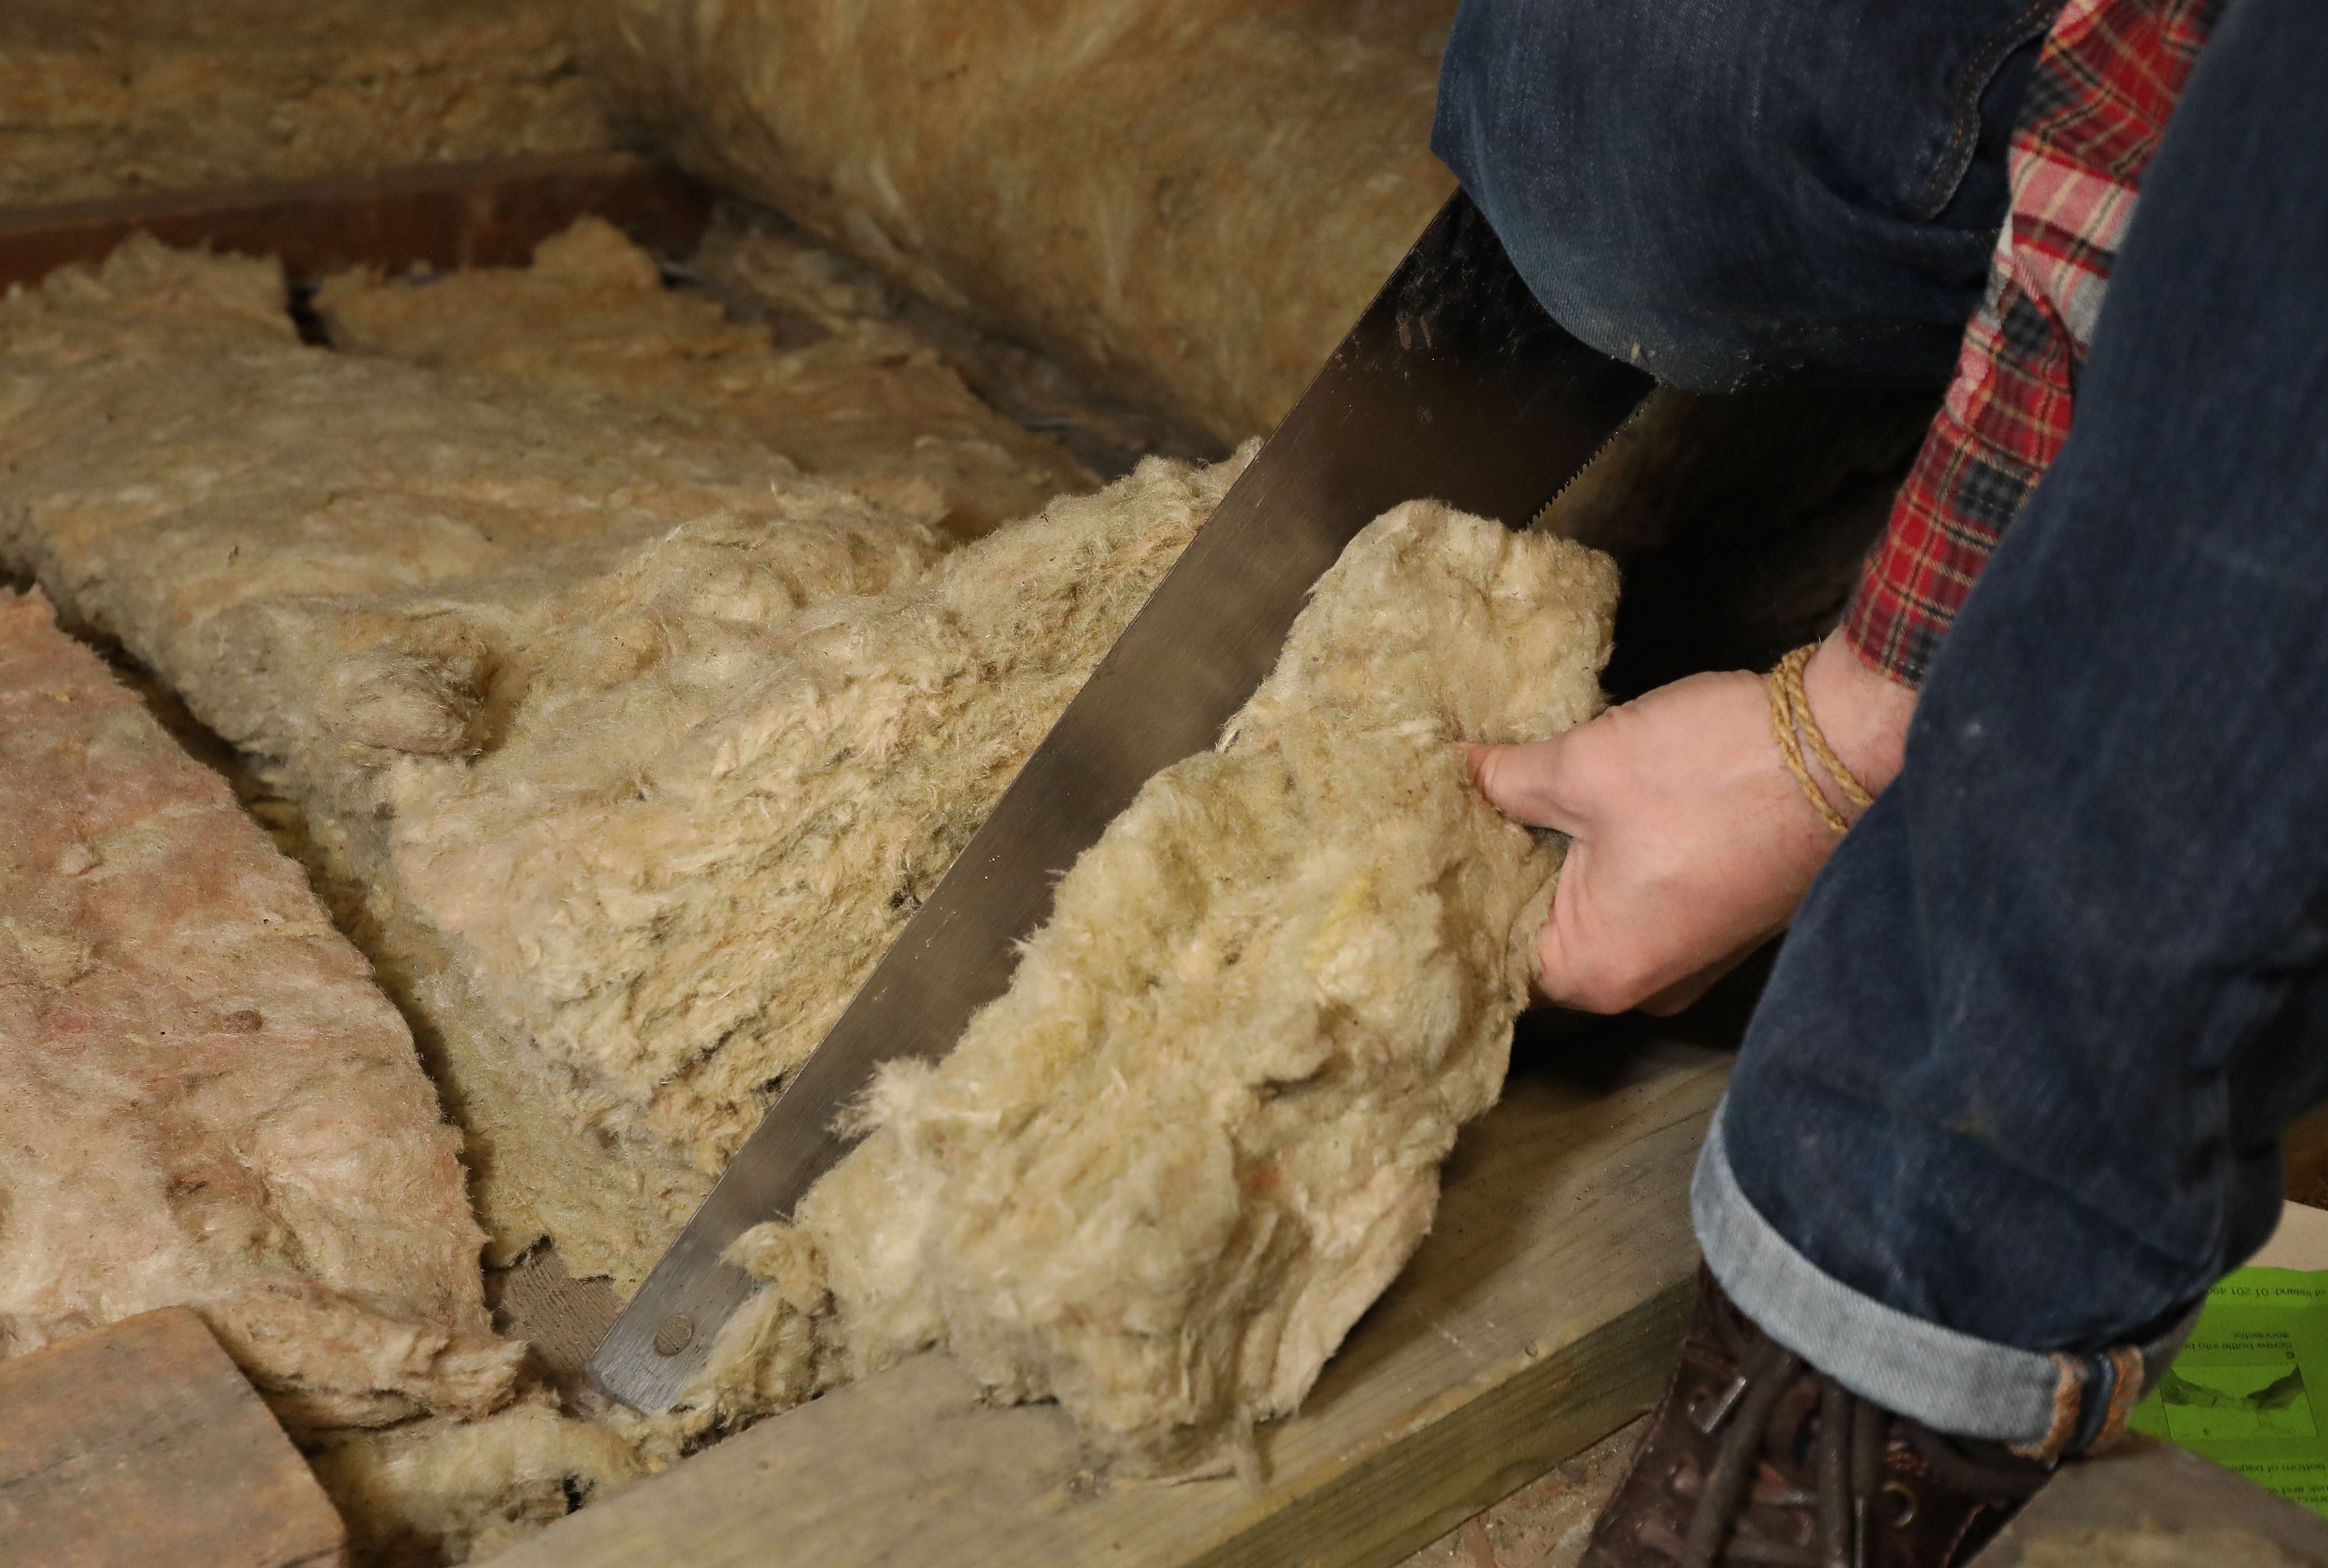 Installing loft insulation will make heating systems more efficient